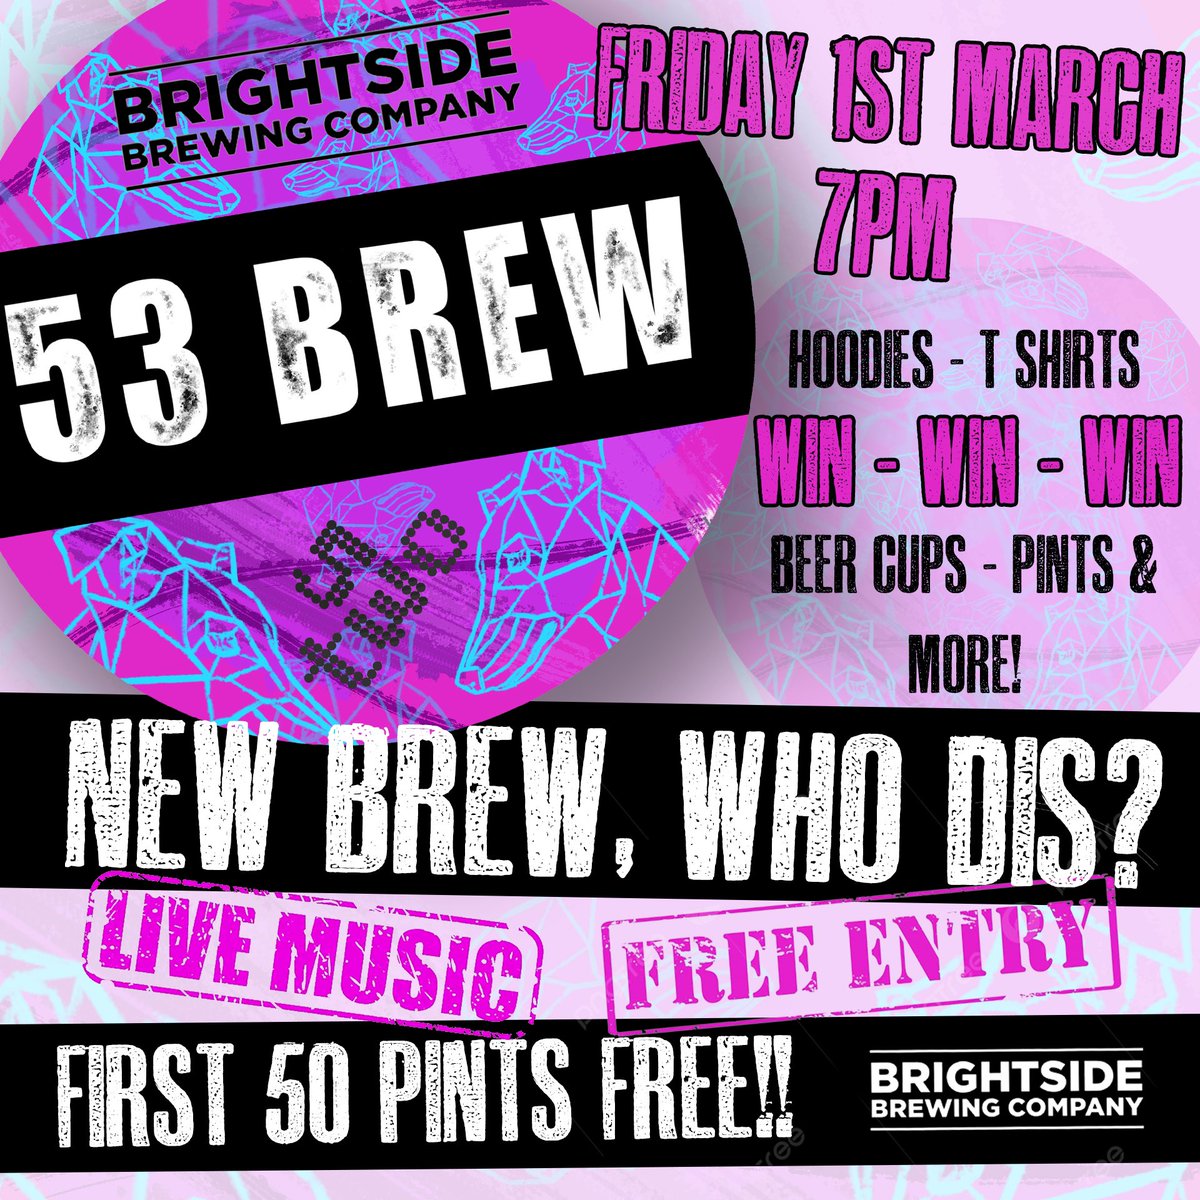 Guys! We’ve got some news! #53Brew is a thing! Thanks to @BrightsideBrew we’re bringing a new tasty bev to the arches. AND we’re giving away some #FREE stuff, including #beer! We’d love you to join us for our launch night. Come, drink, enjoy! 💙💜 #Manchester #Venue #Mcr #Beer